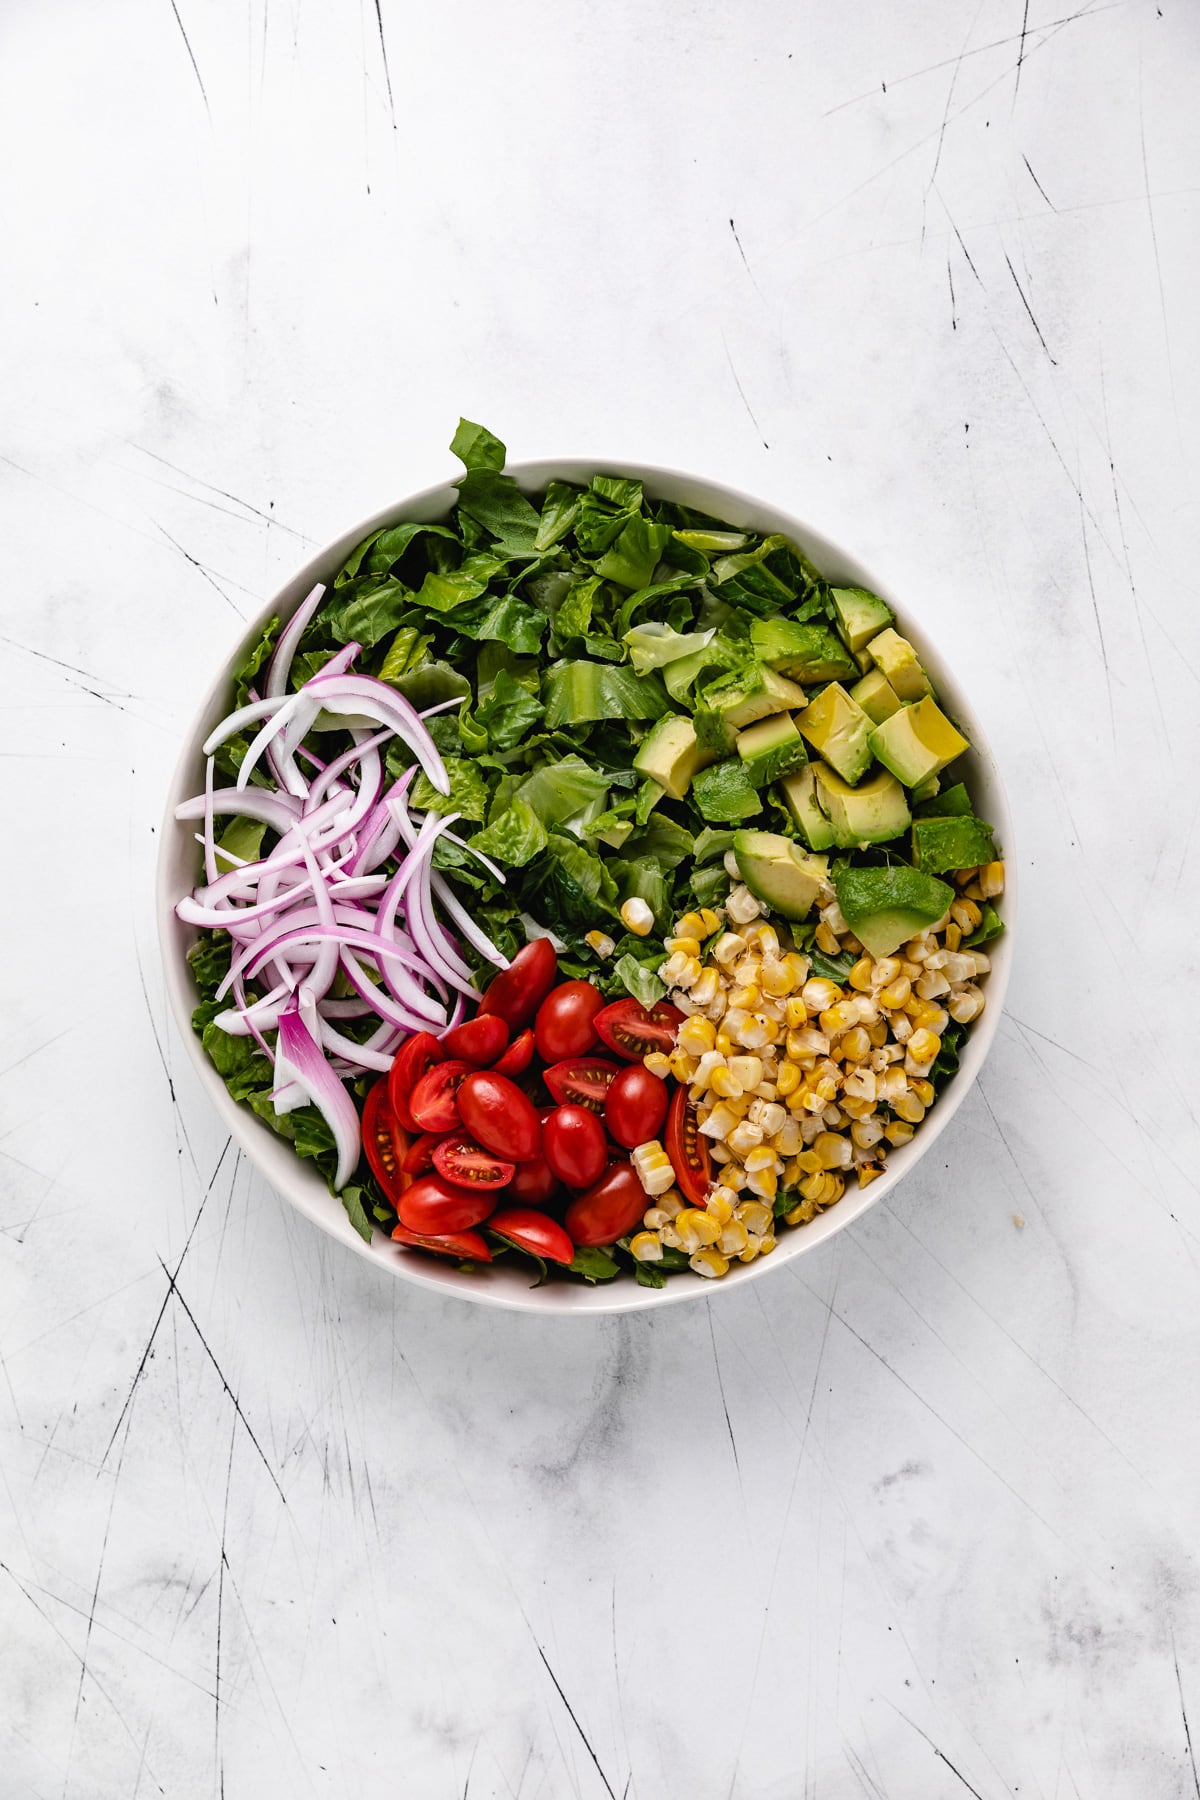 Corn, onions, tomatoes, avocado, and lettuce in a bowl.